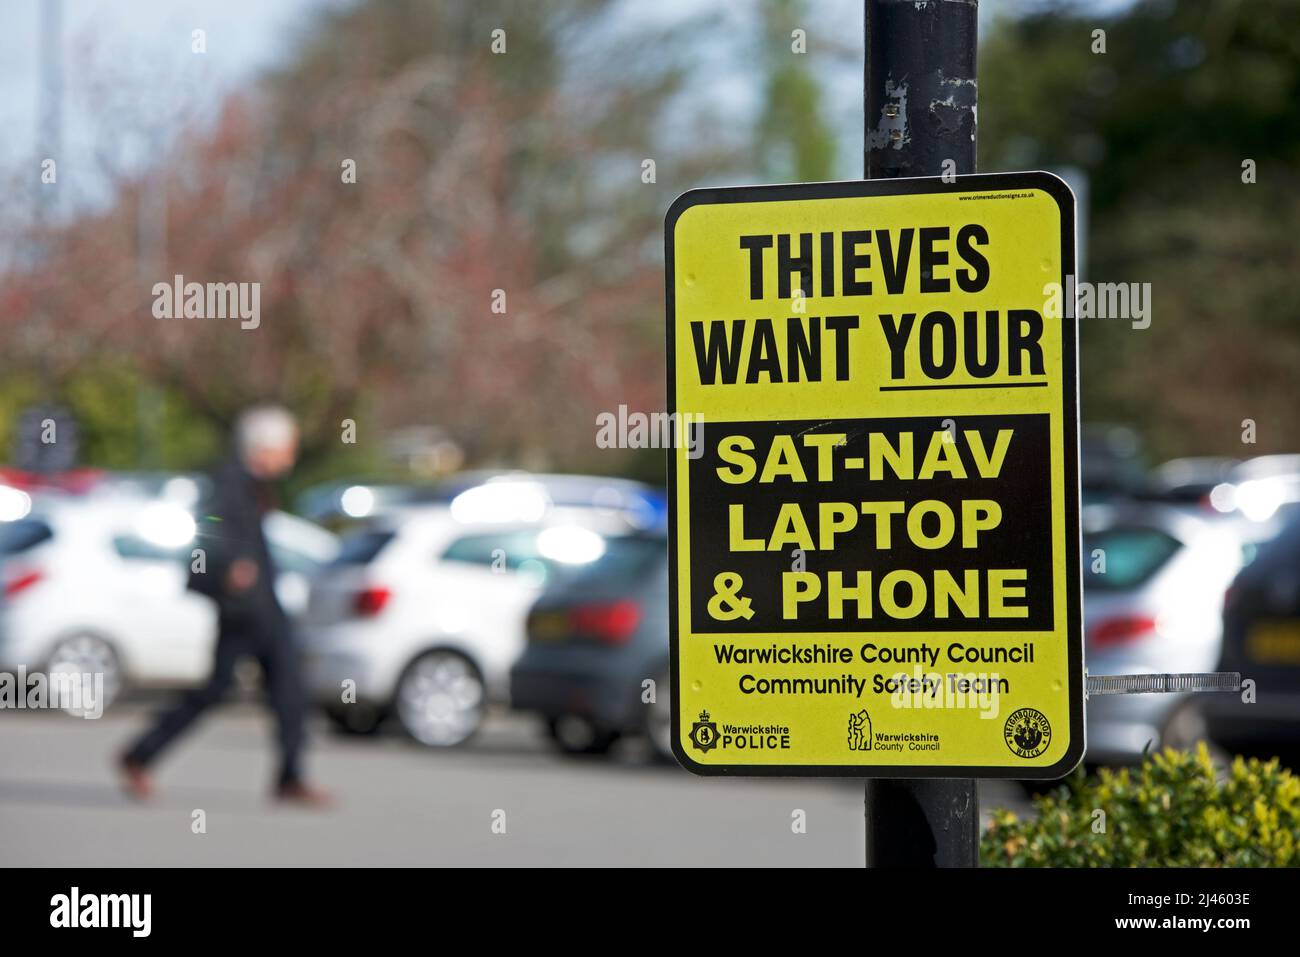 Sign at entrance to car park, warning motorists that thieves want your sat-nav, laptop and phone, England UK Stock Photo